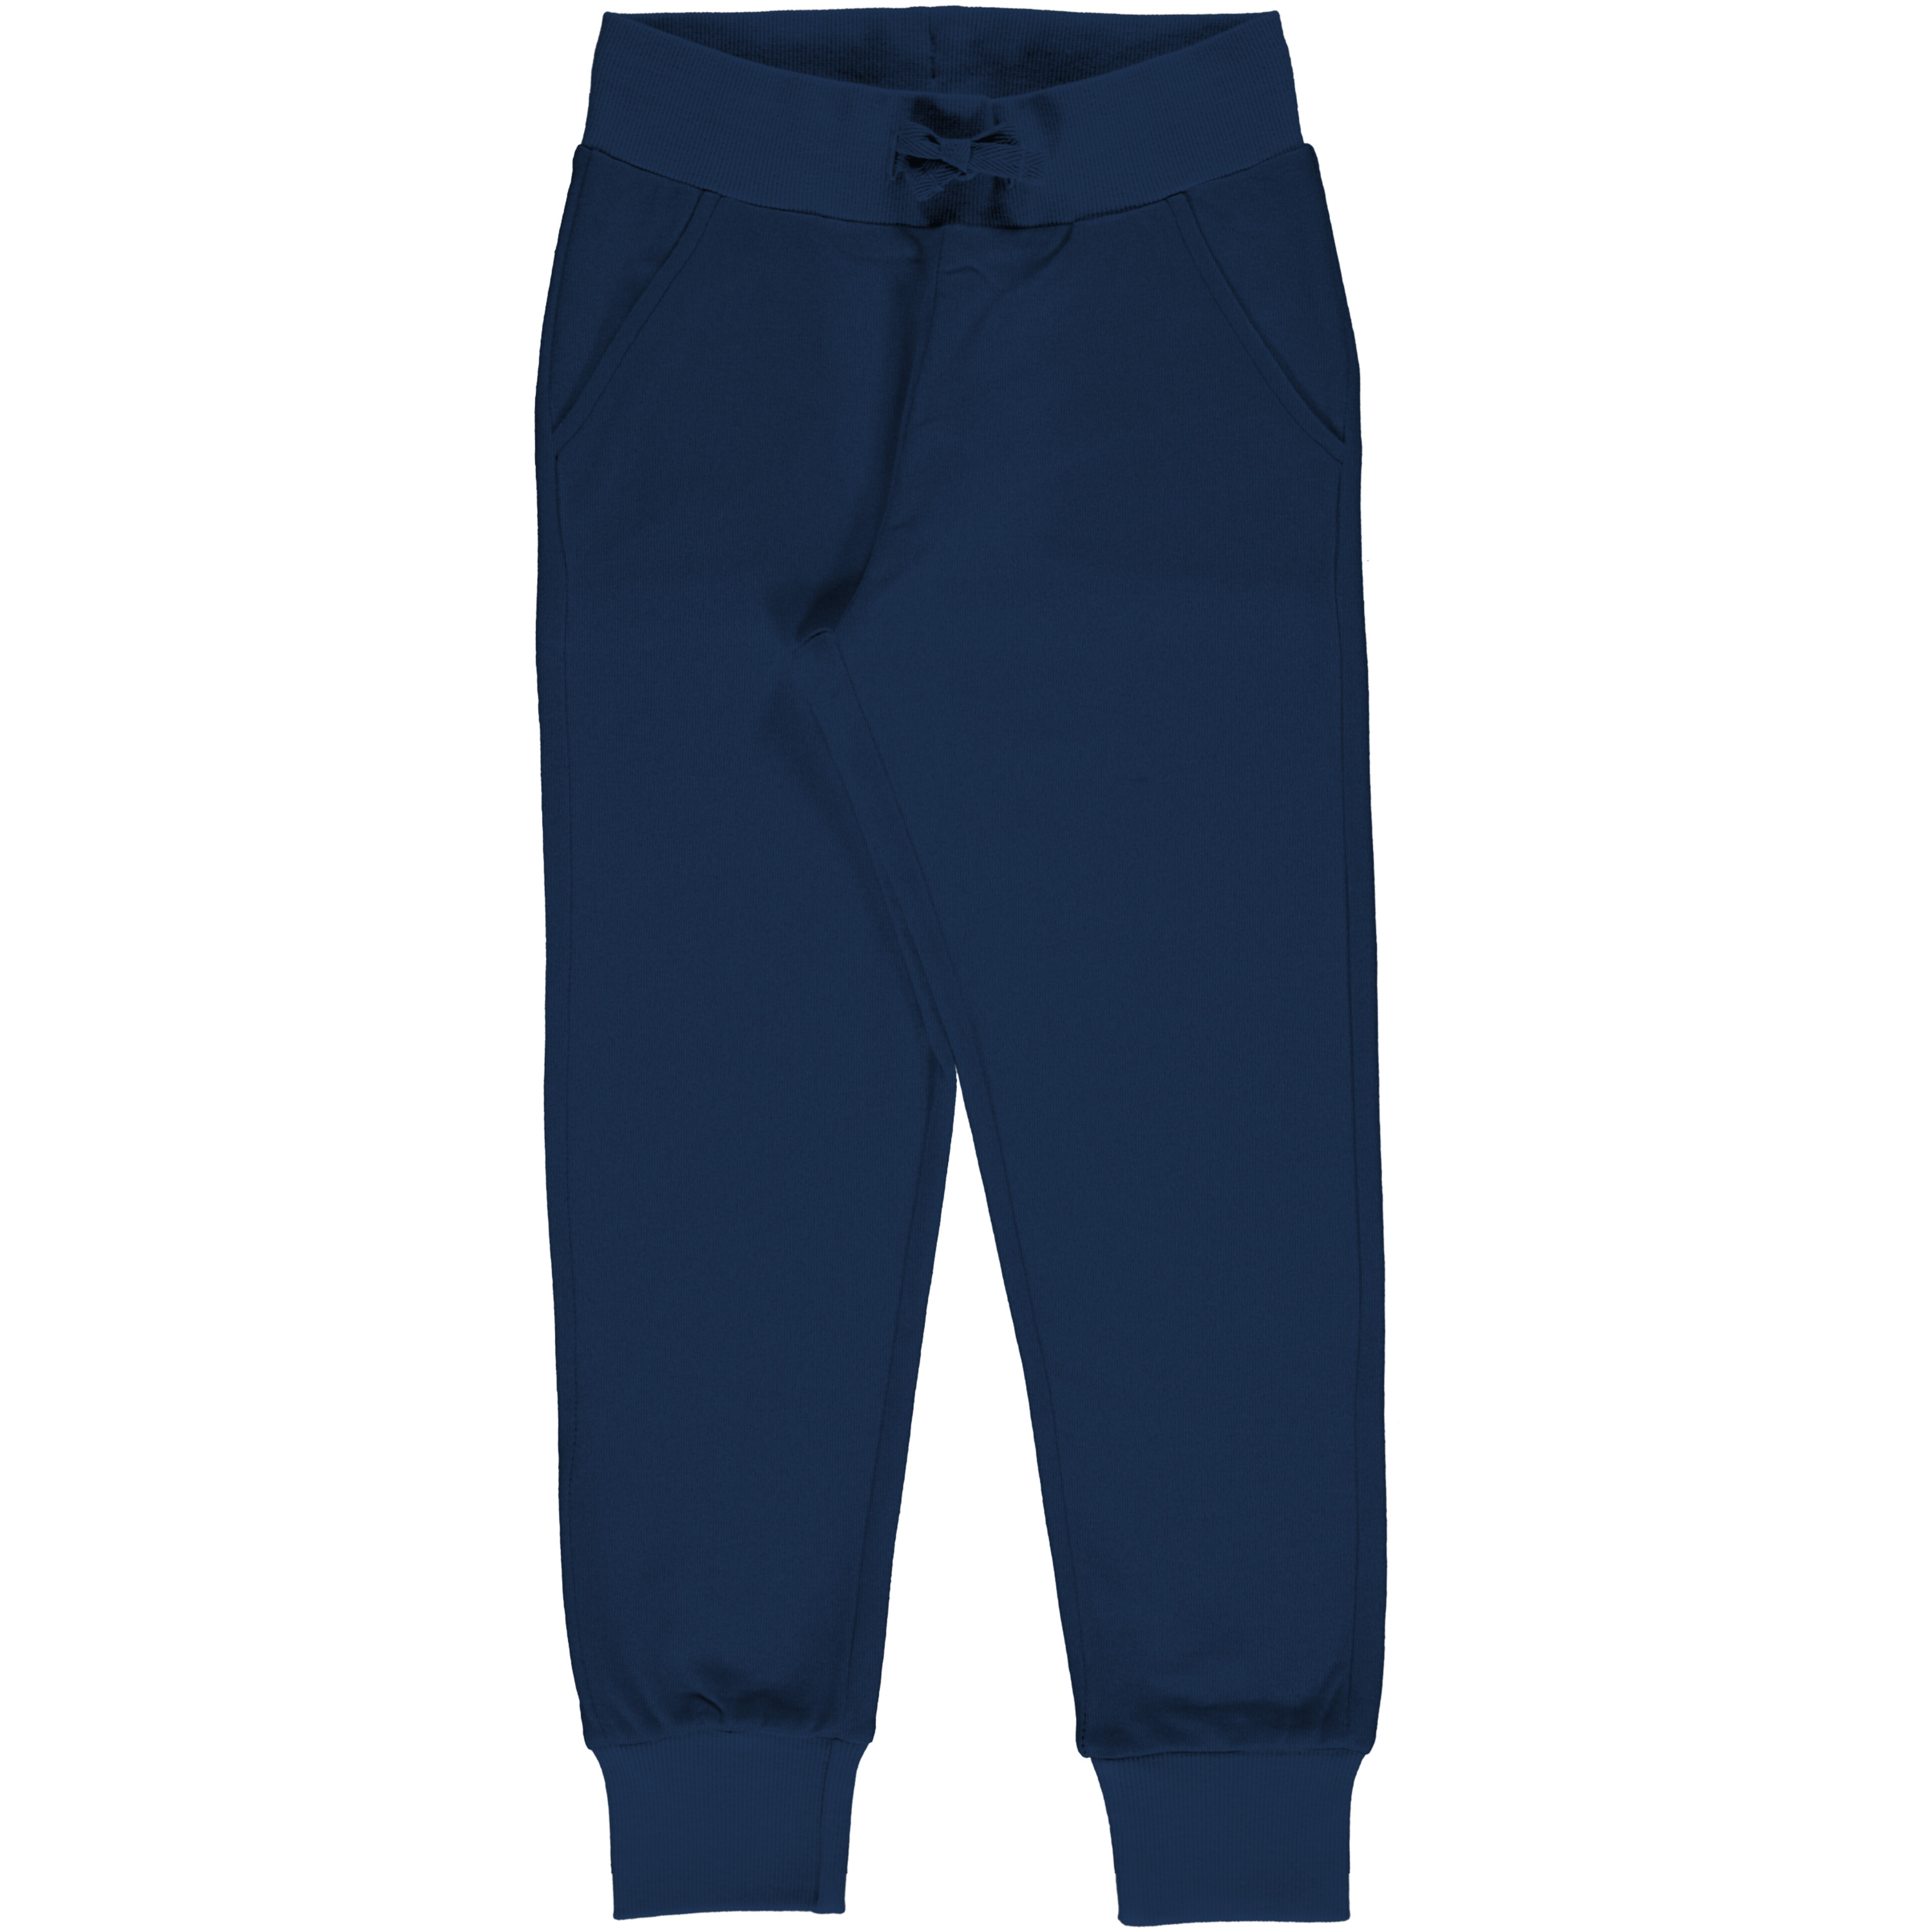 Hose Sweat solid navy